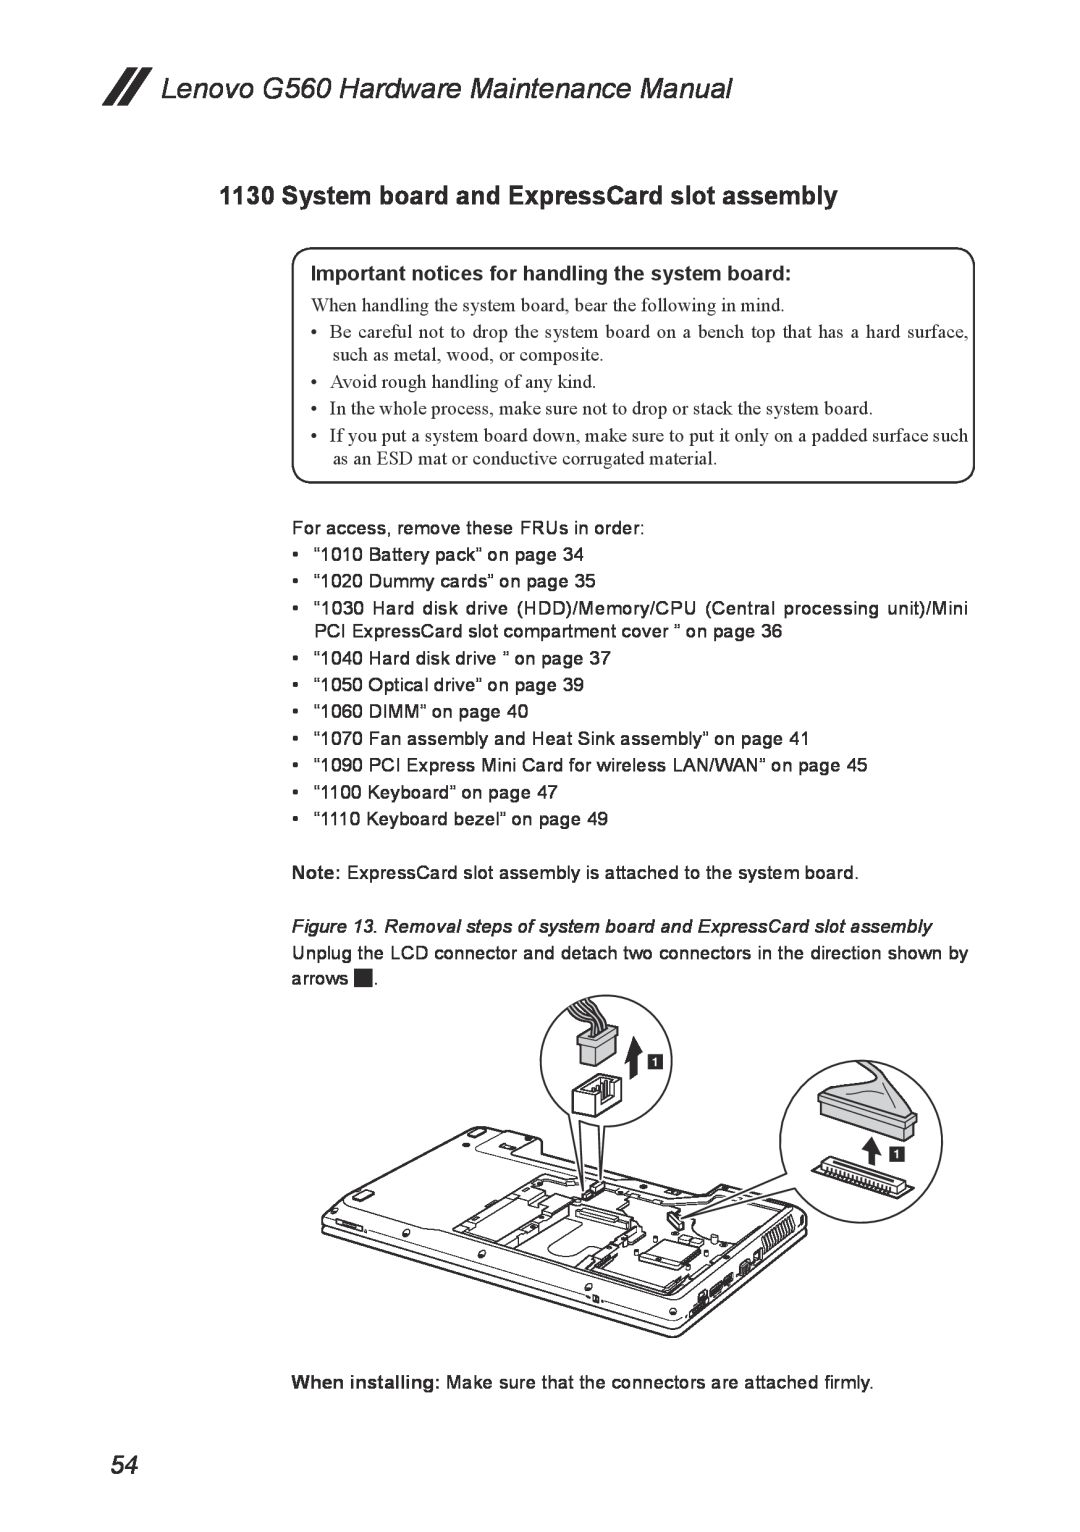 Lenovo G560 manual System board and ExpressCard slot assembly, Important notices for handling the system board 